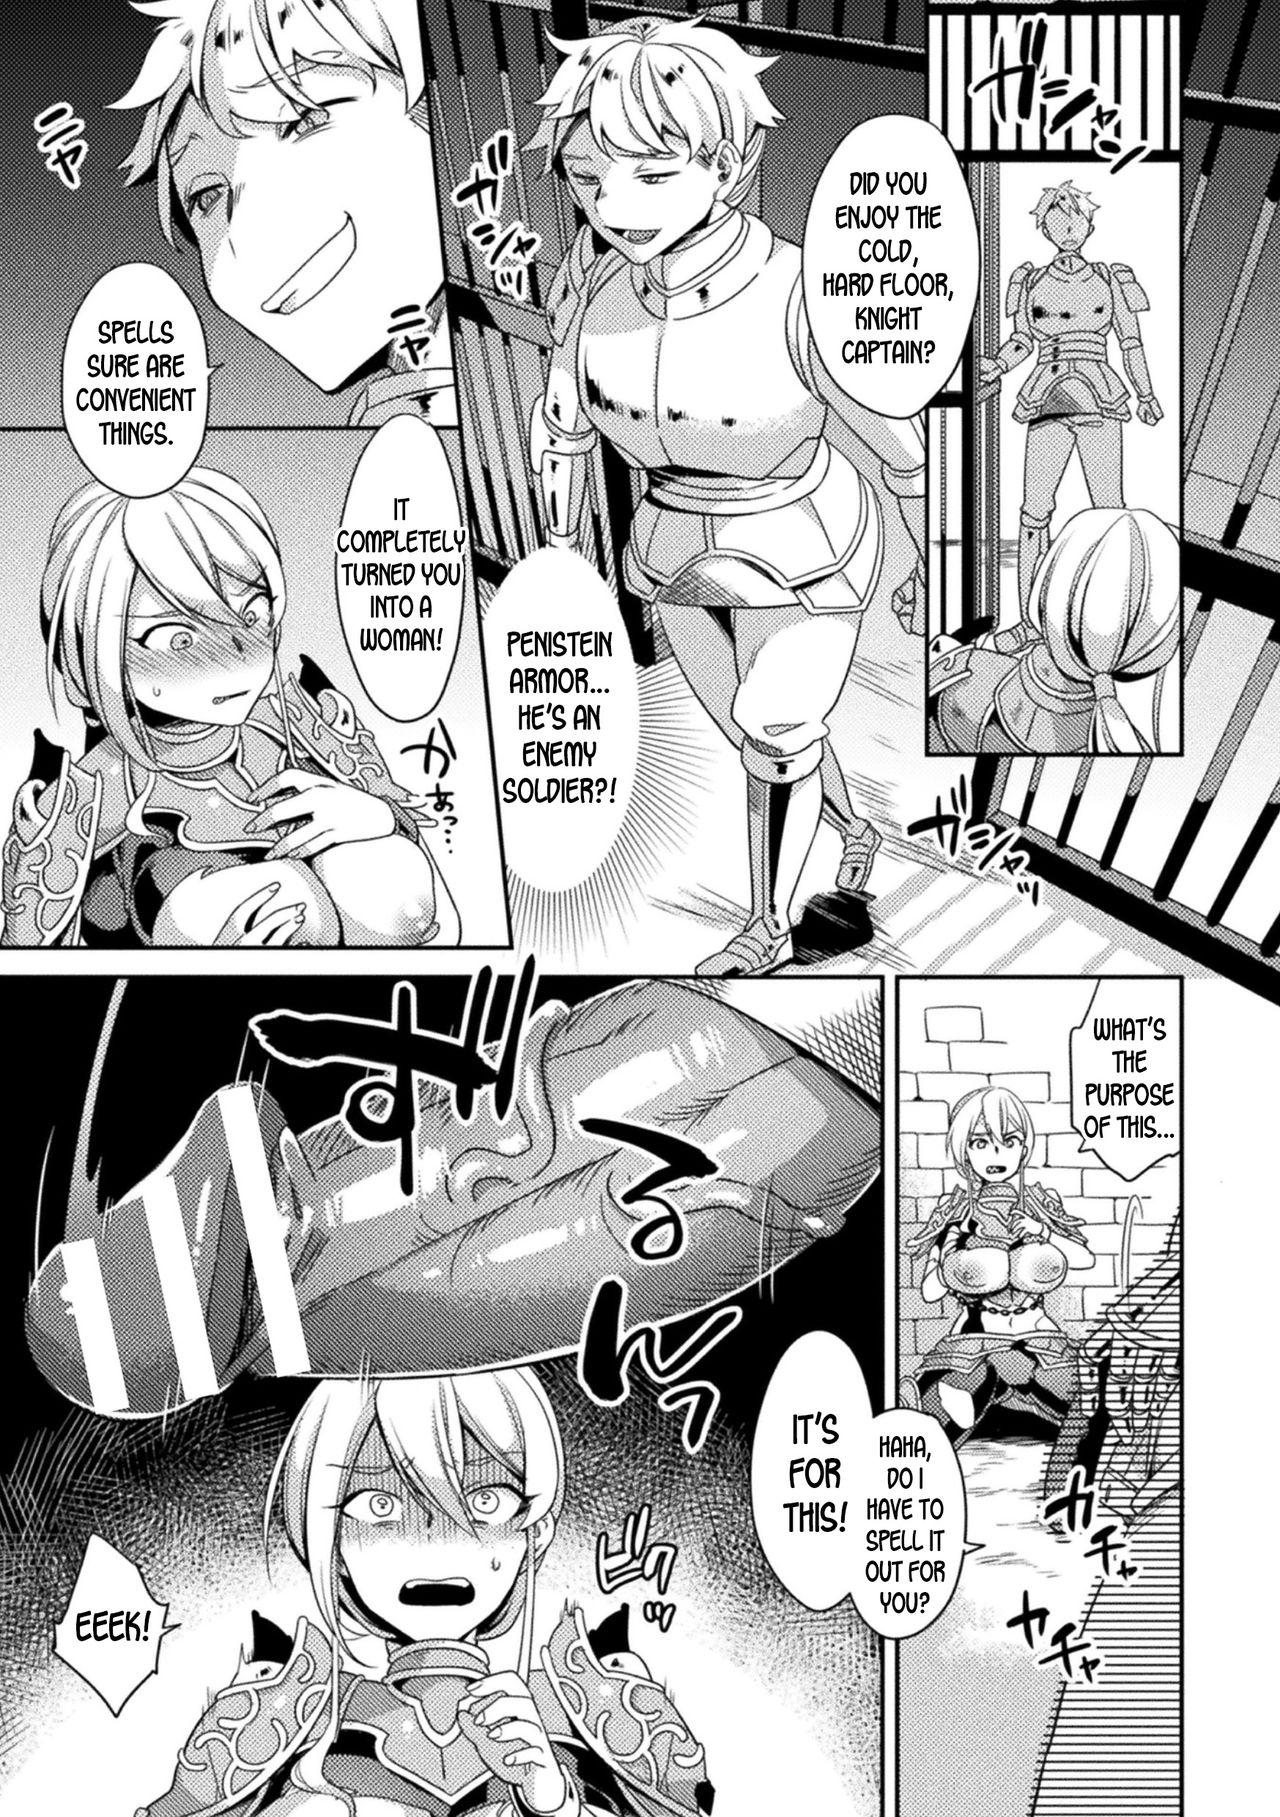 Shower Genderbent Knight Raul, the Fallen Whore ~ He couldn't win against money and cocks Movie - Page 3